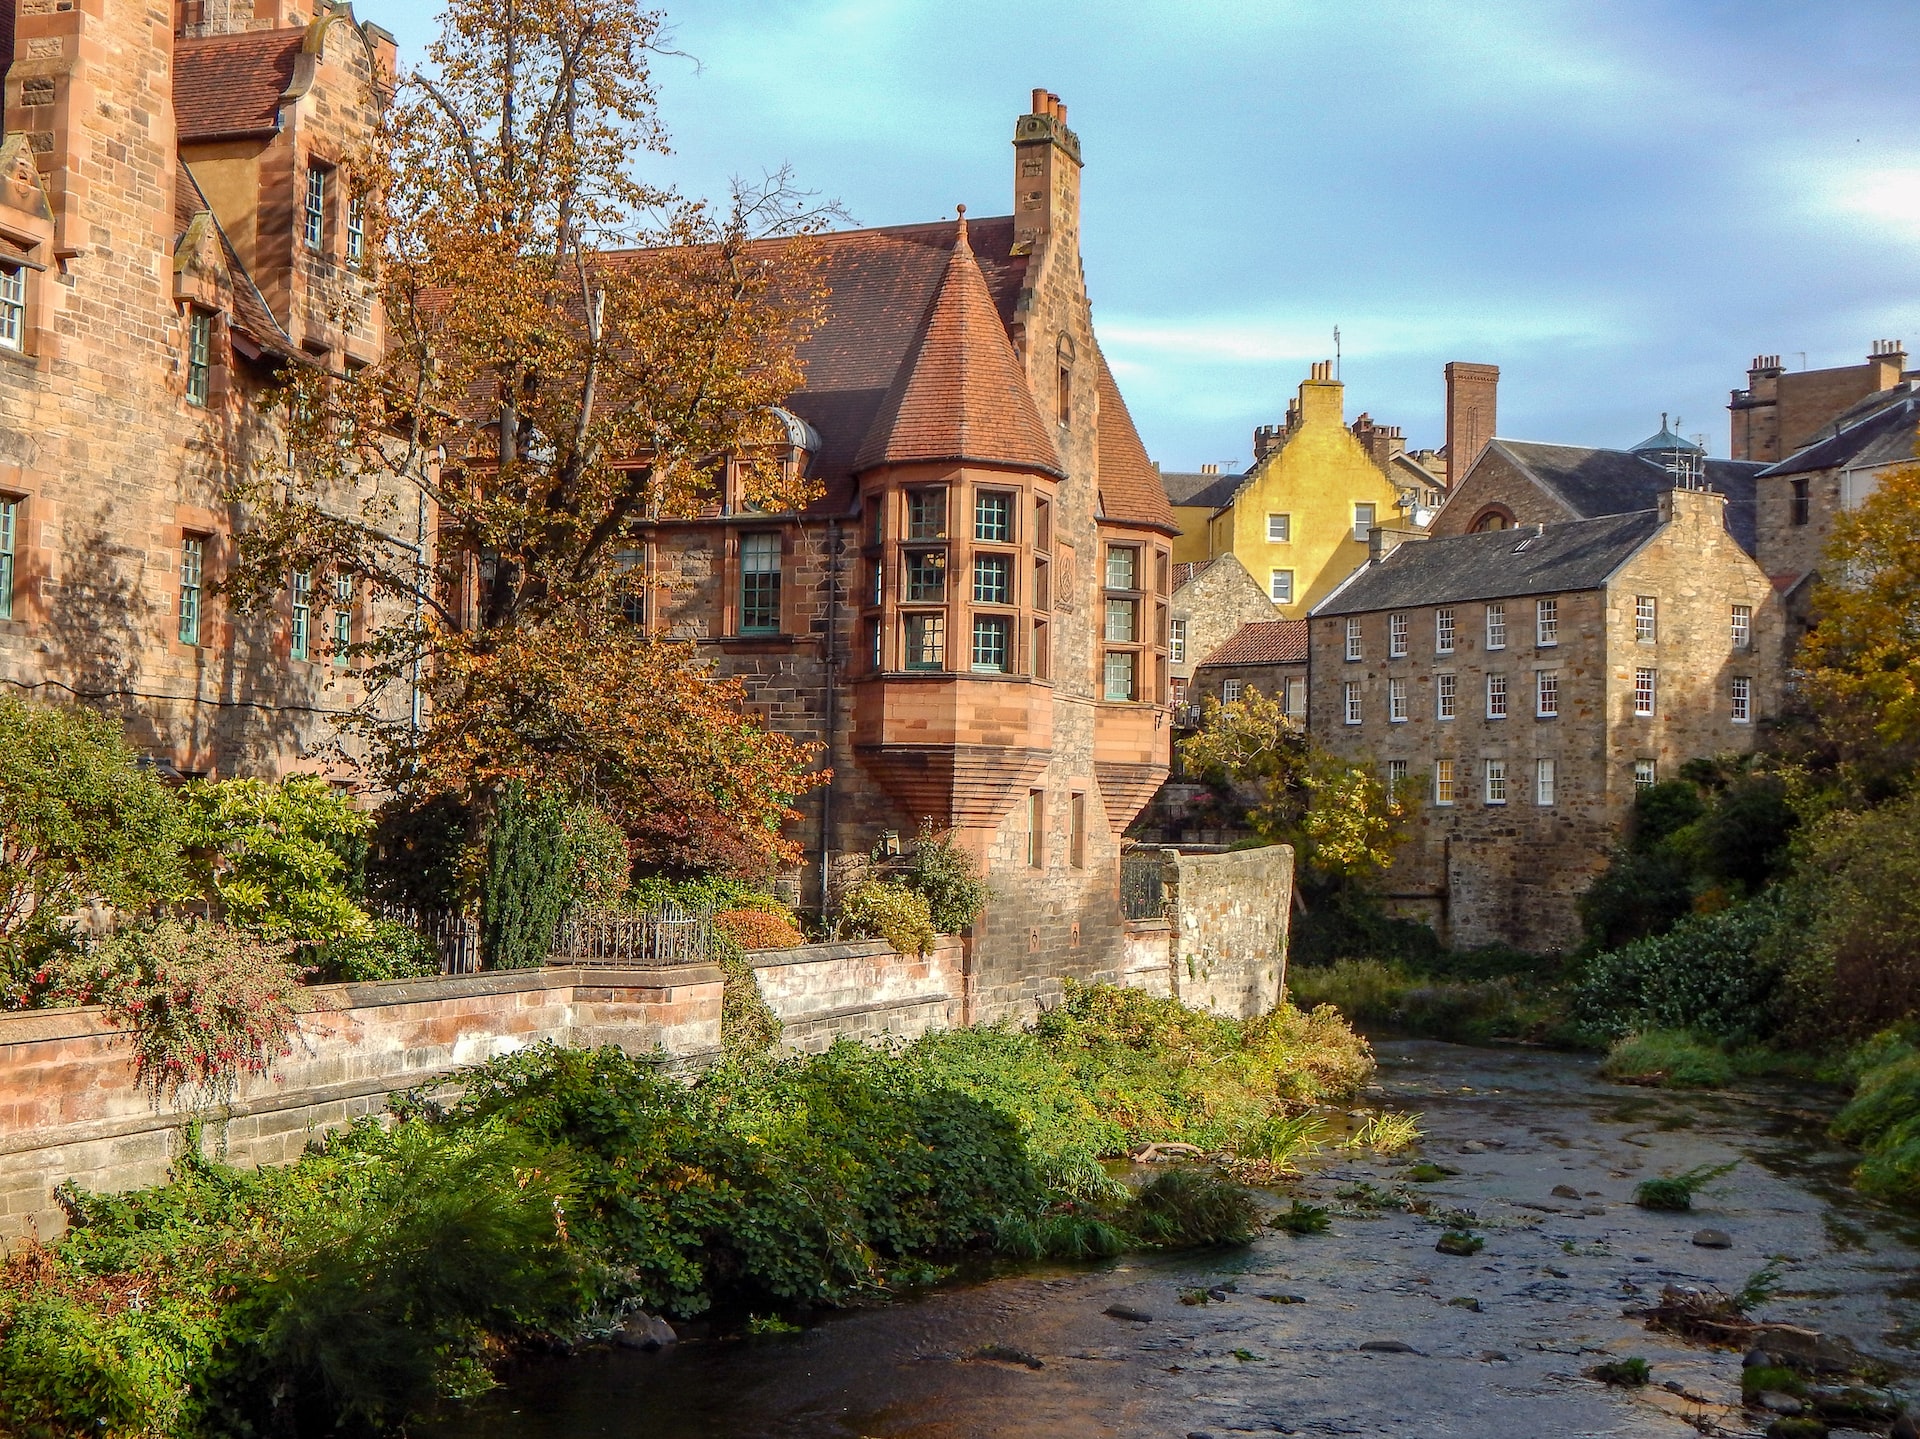 Uptick in average selling price of houses in Edinburgh, Lothians, Fife and Borders